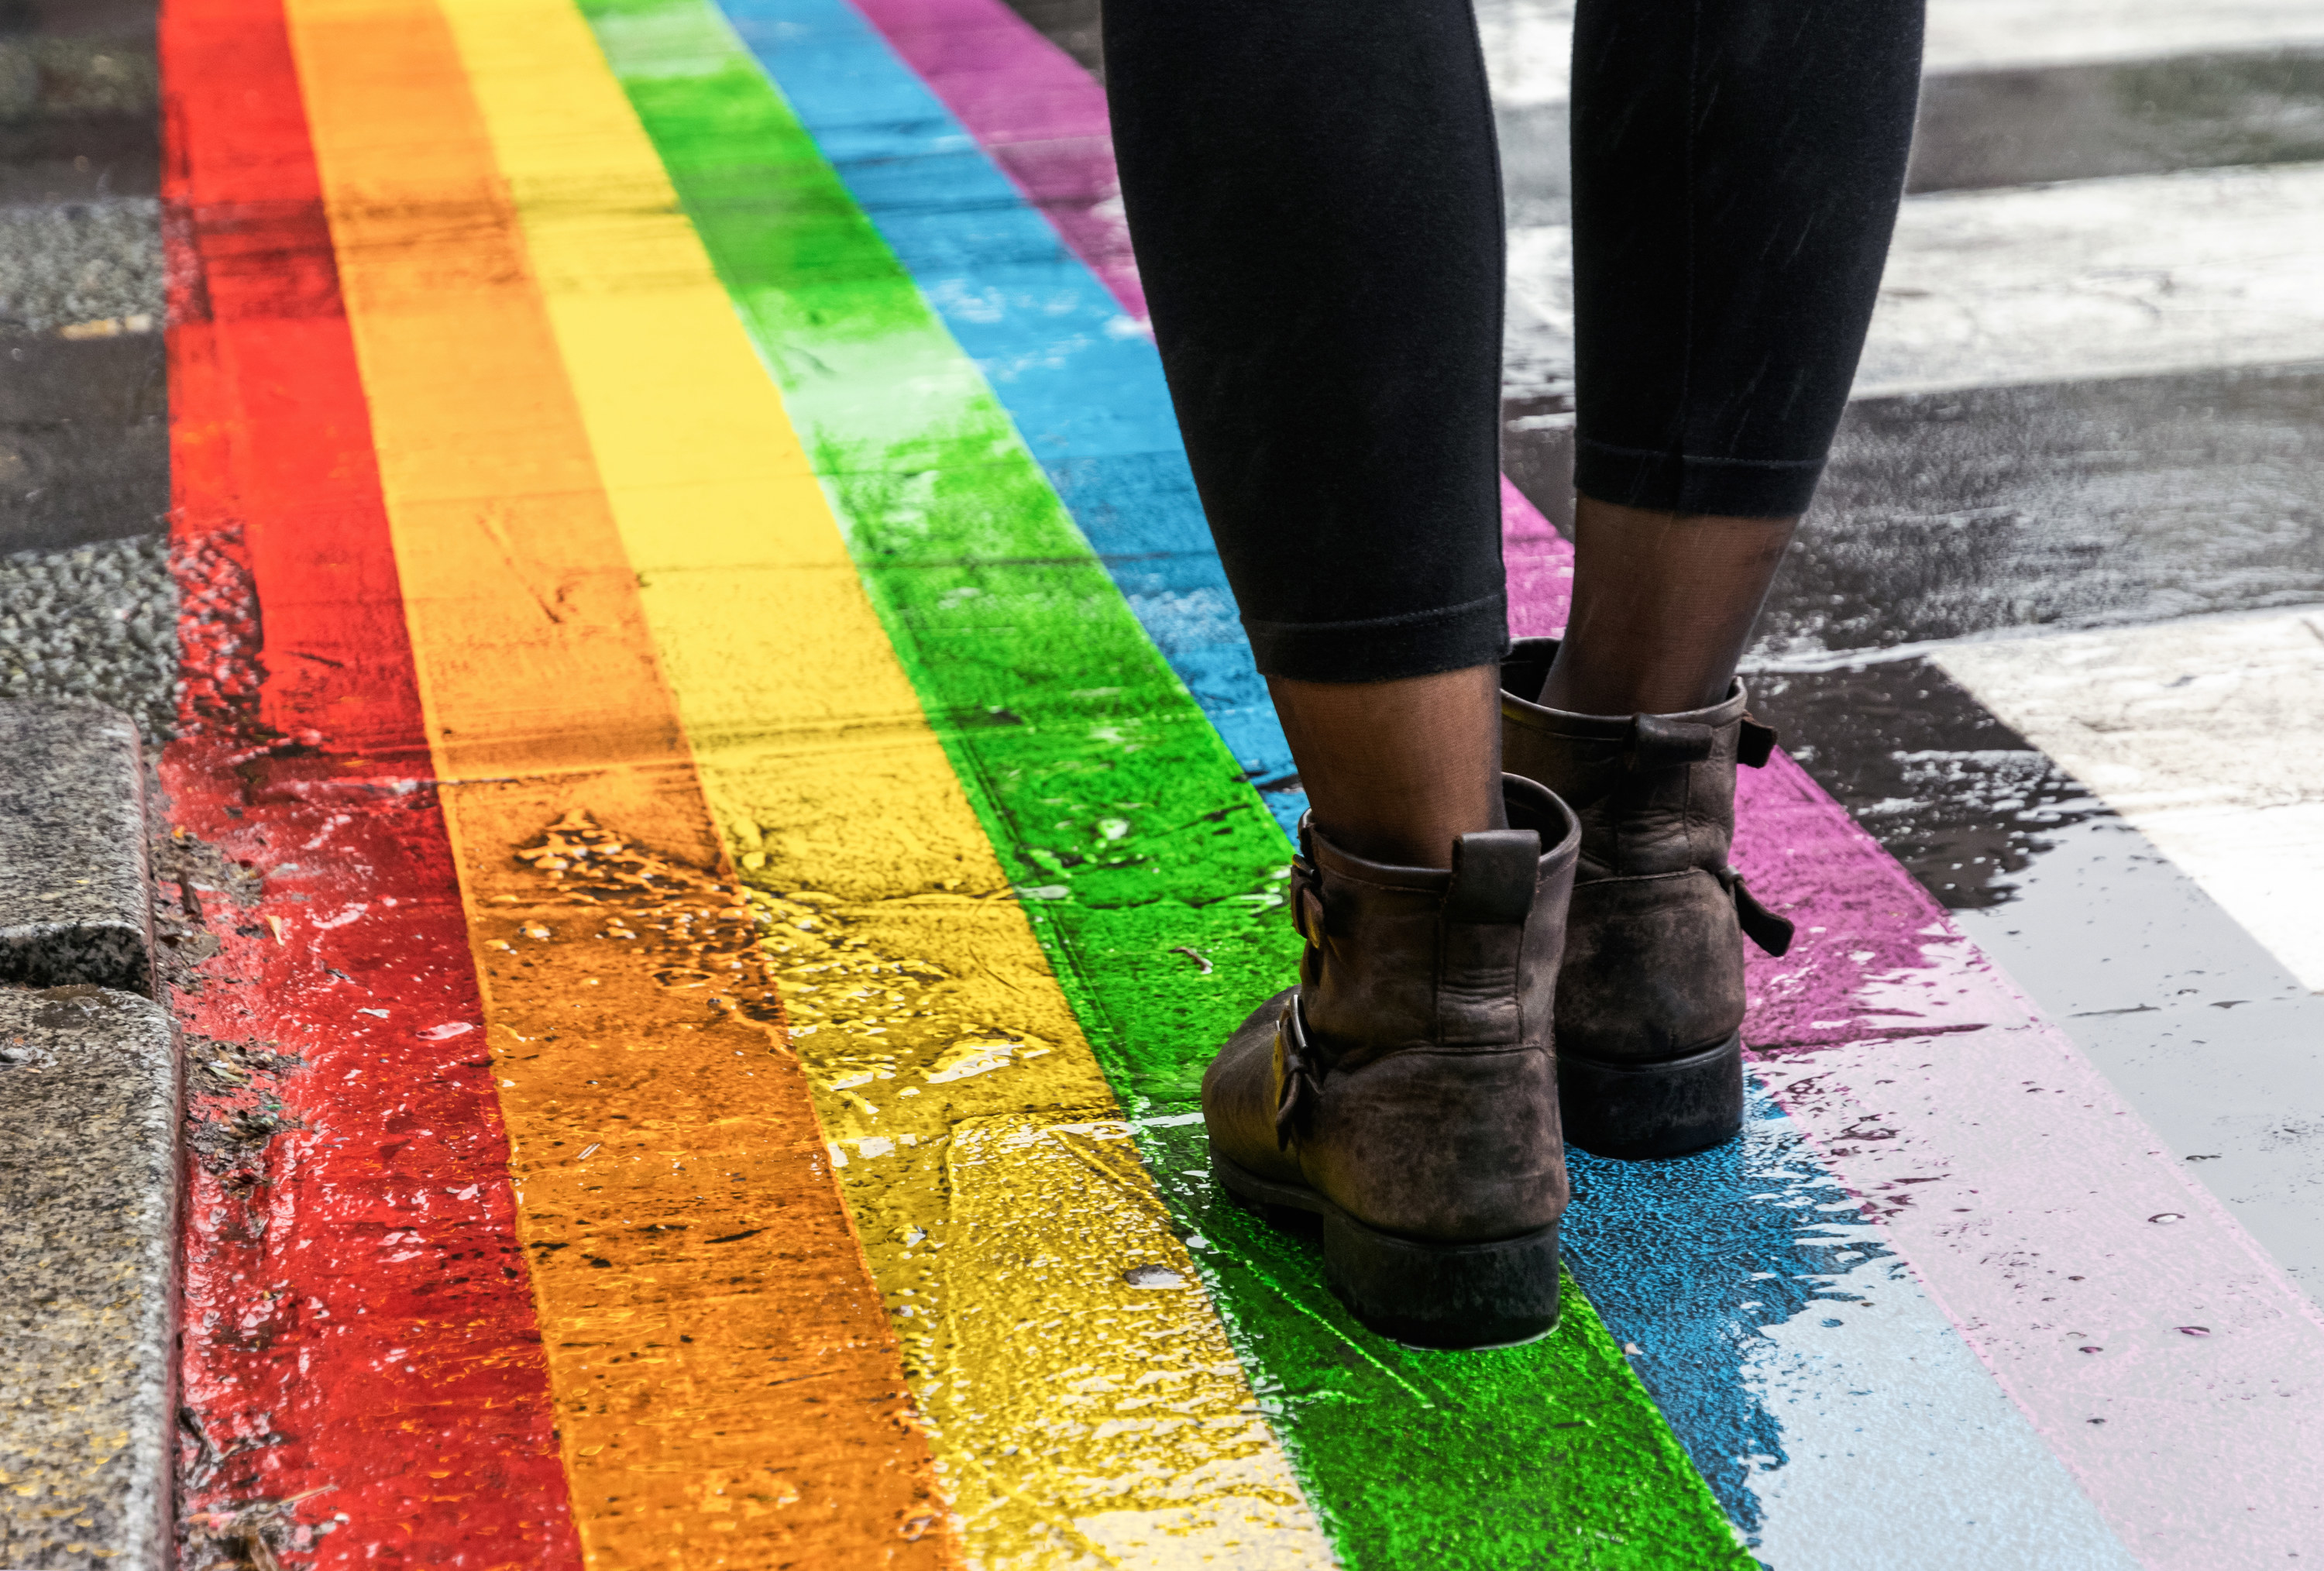 Brown boots and black leggings standing on a rainbow painted crosswalk in the rain.